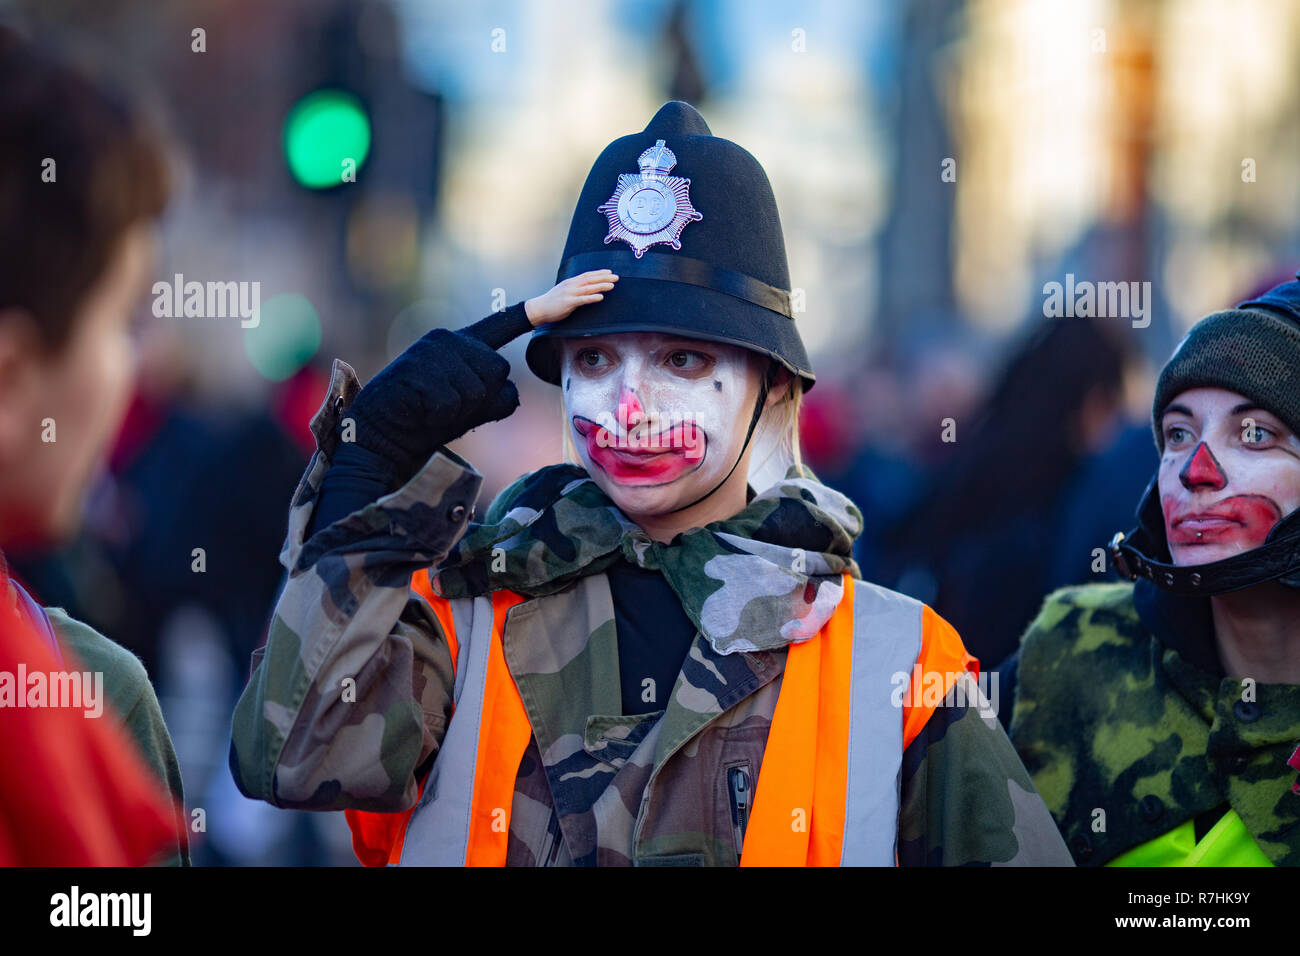 An Anti-Facist demonstrator dressed as a clown/policewoman.  3,000 Pro-Brexit demonstrators and 15,000 Anti-Facist counter demonstrators took to the streets of London to voice their stance on the deal ahead of the key Brexit vote in parliament this Tuesday. Stock Photo